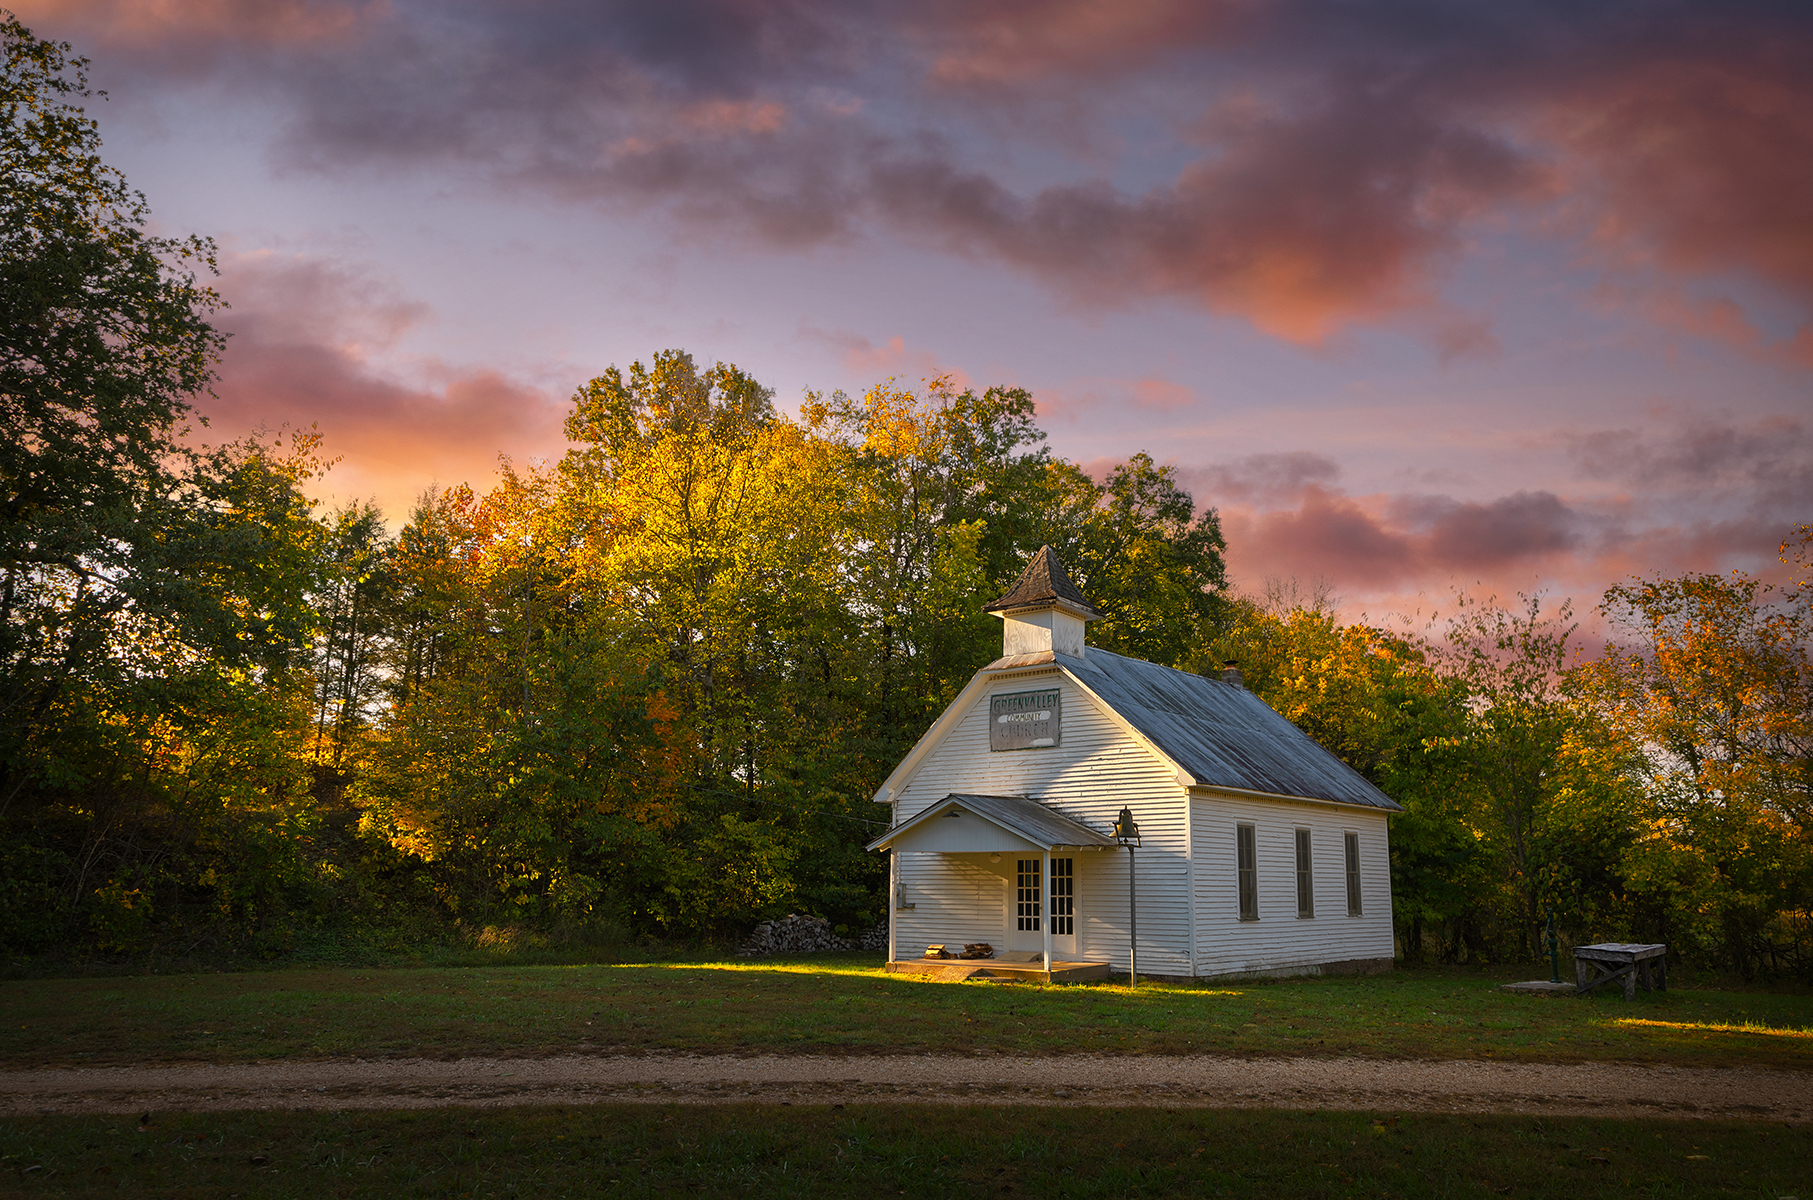 A country church is shaded by trees during a sunset